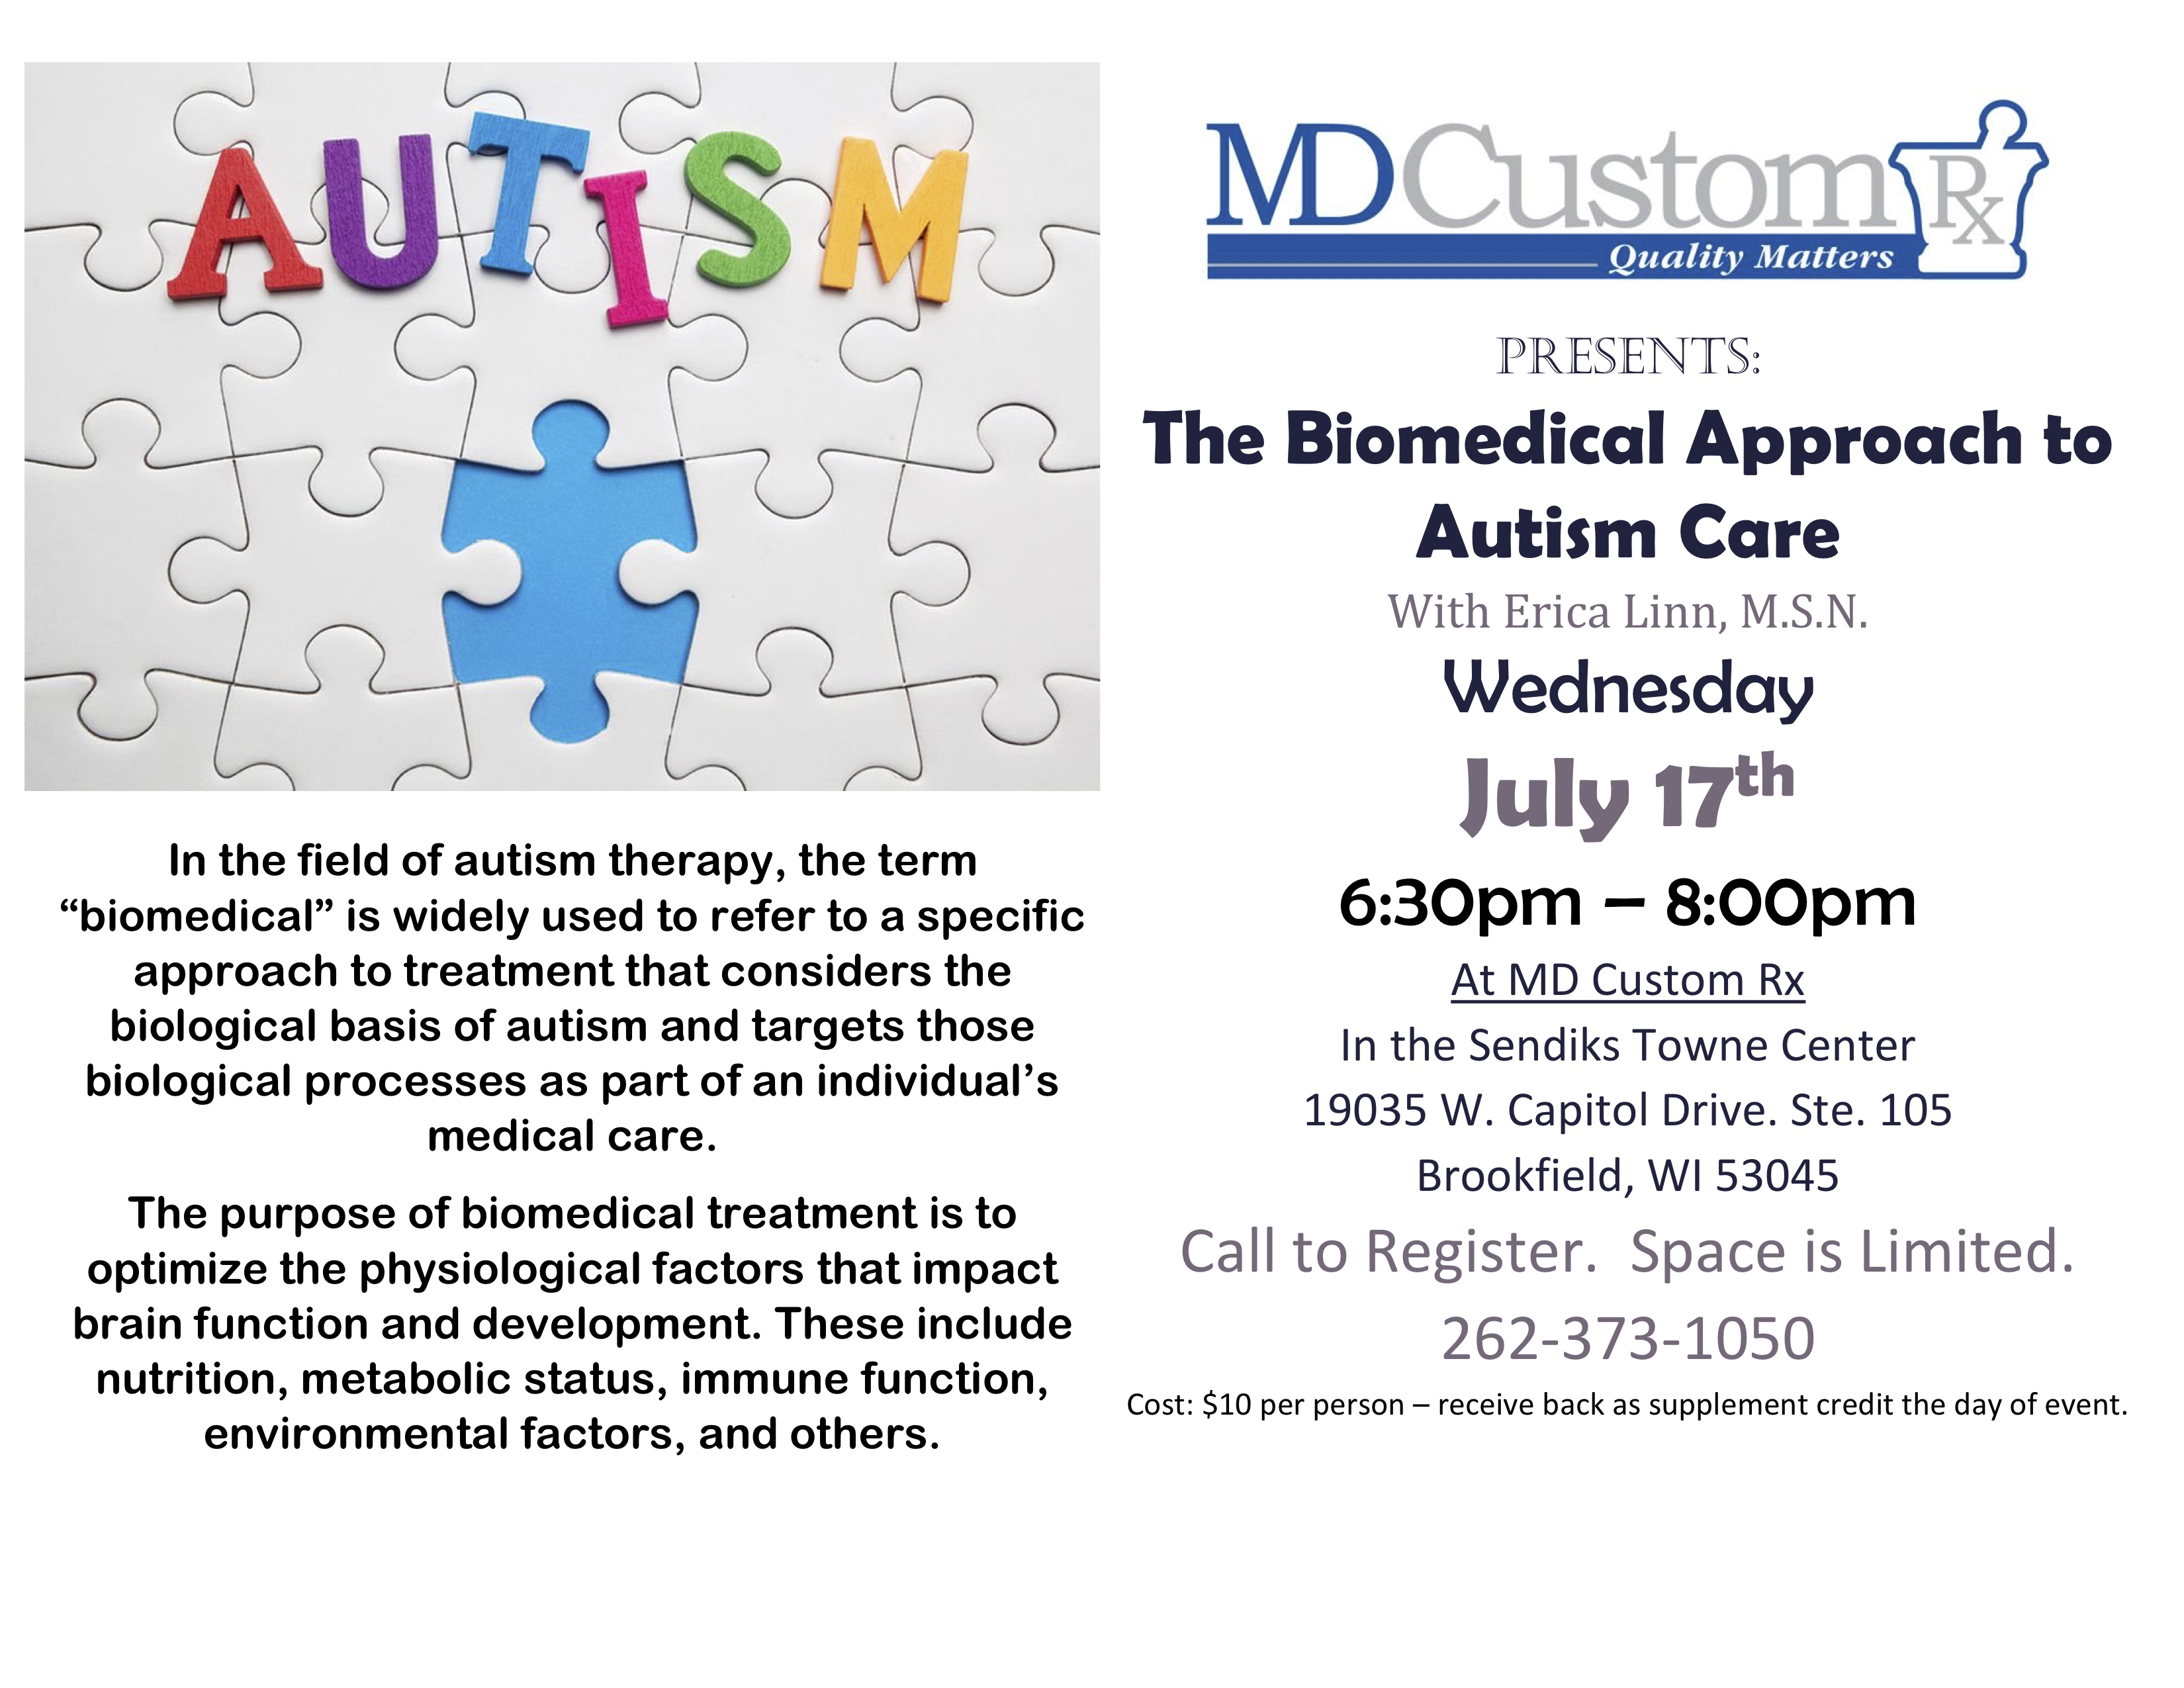 Biomedical Approach to Autism Care